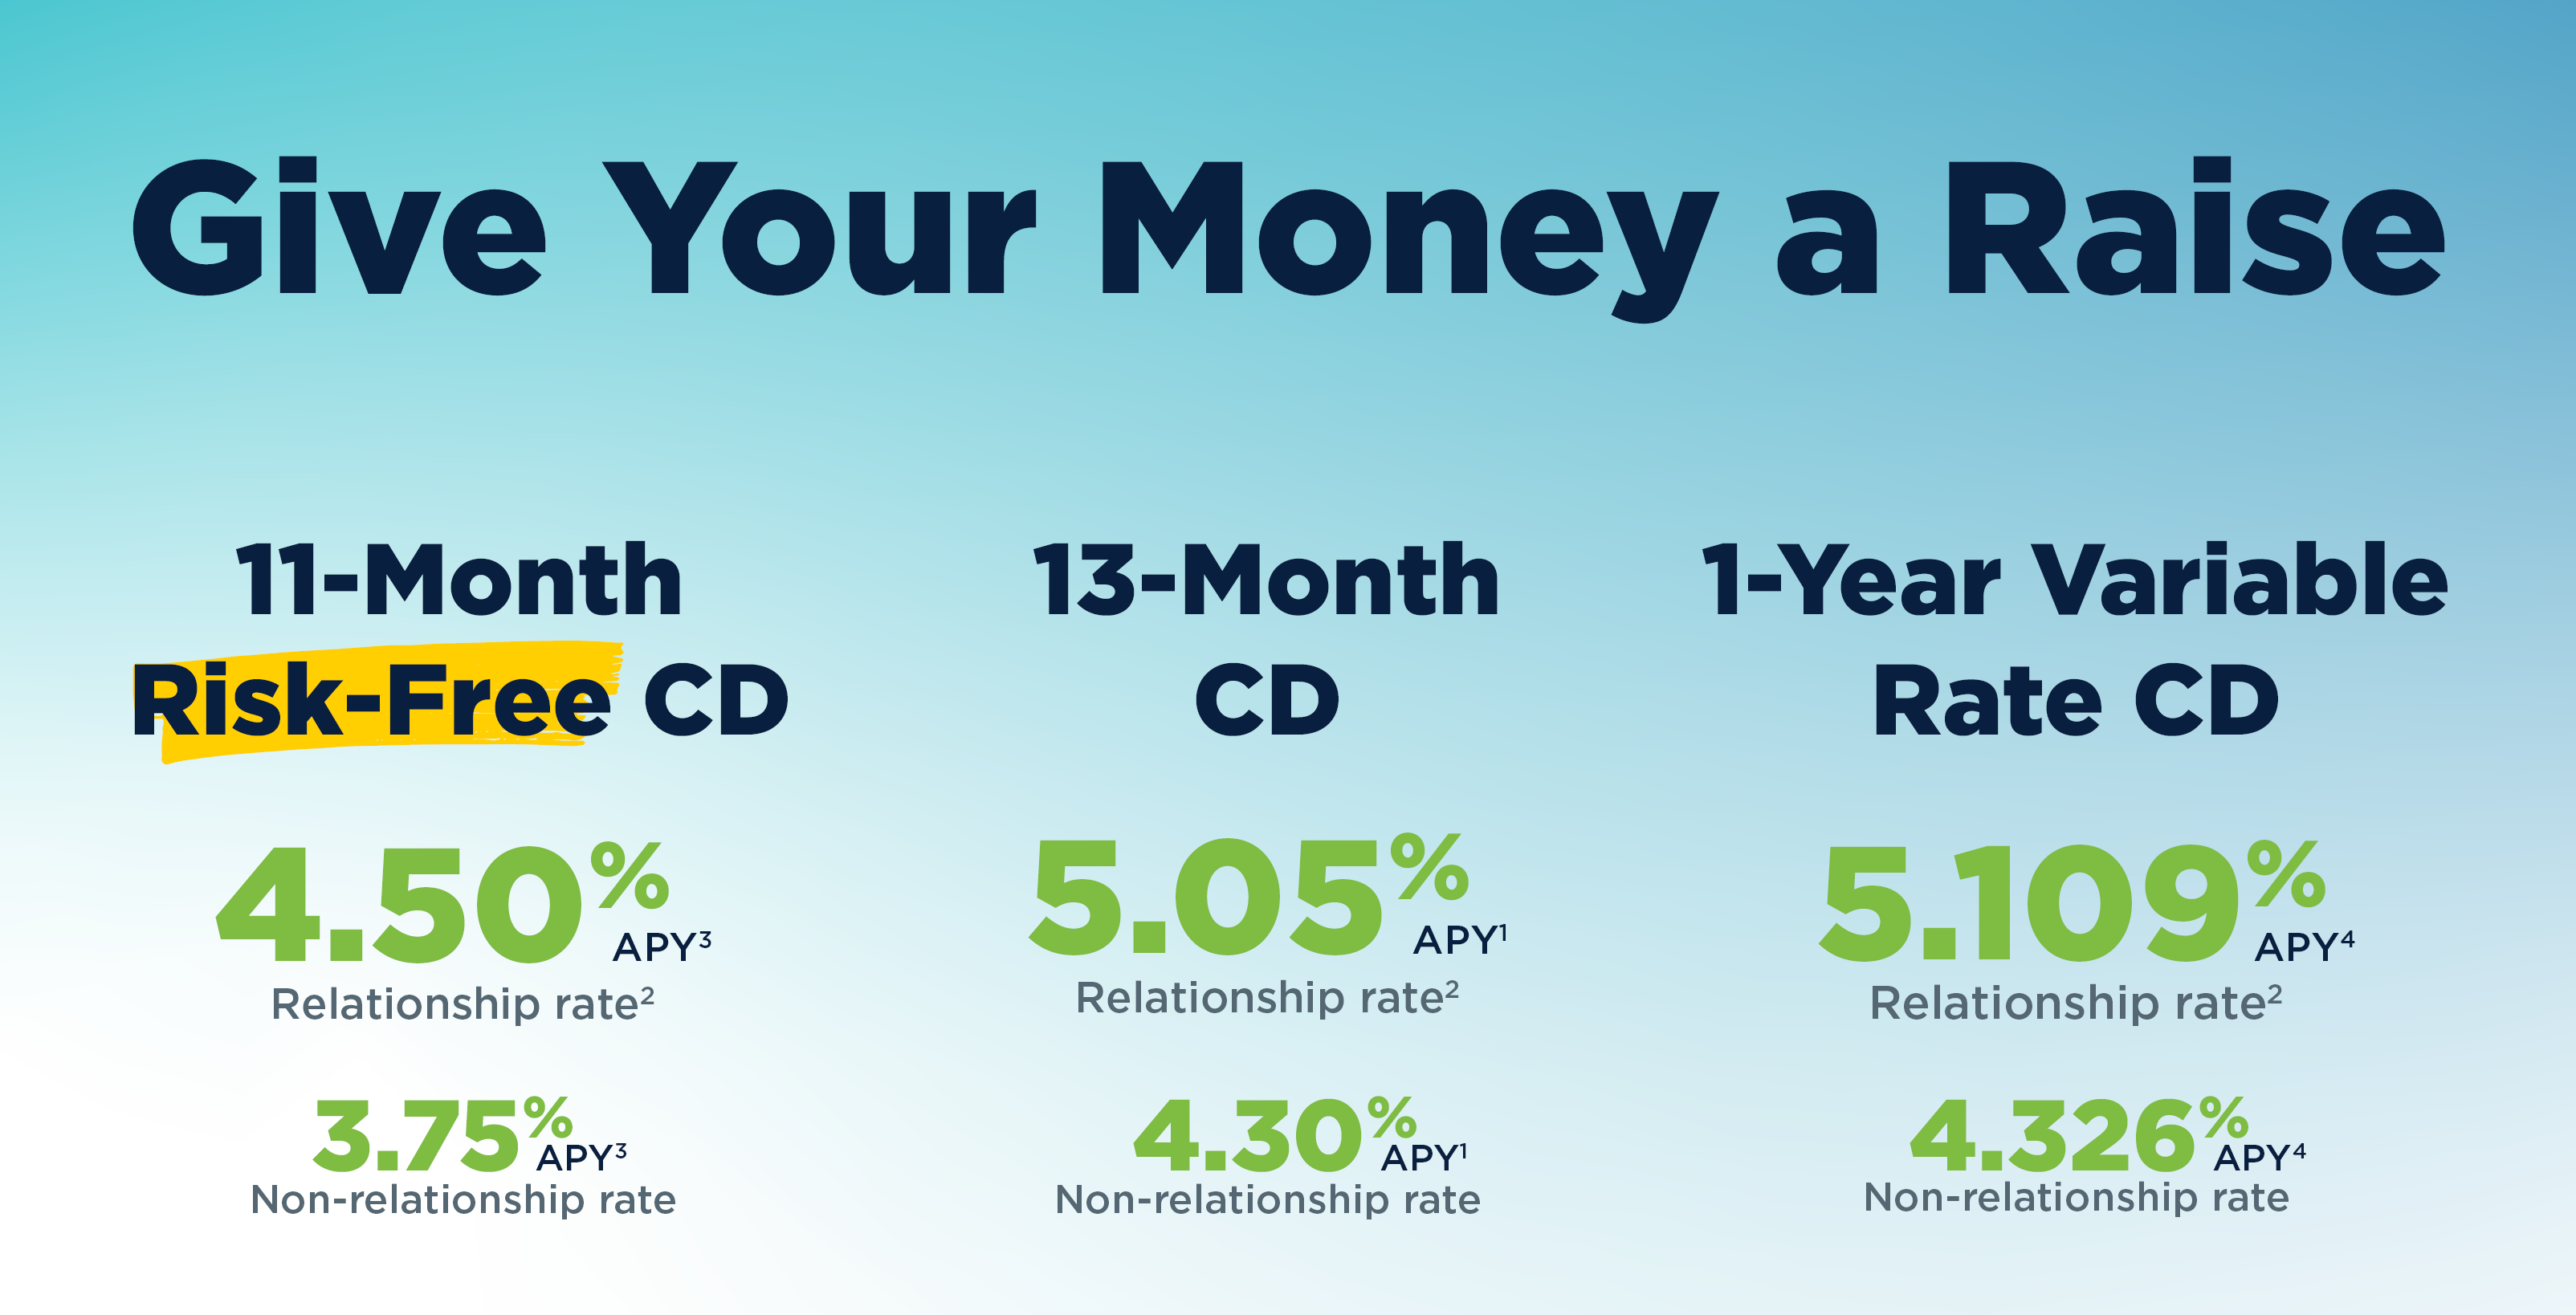 11-Month Risk Free CD, 13-Month CD, and 1-Year Variable Rate CD